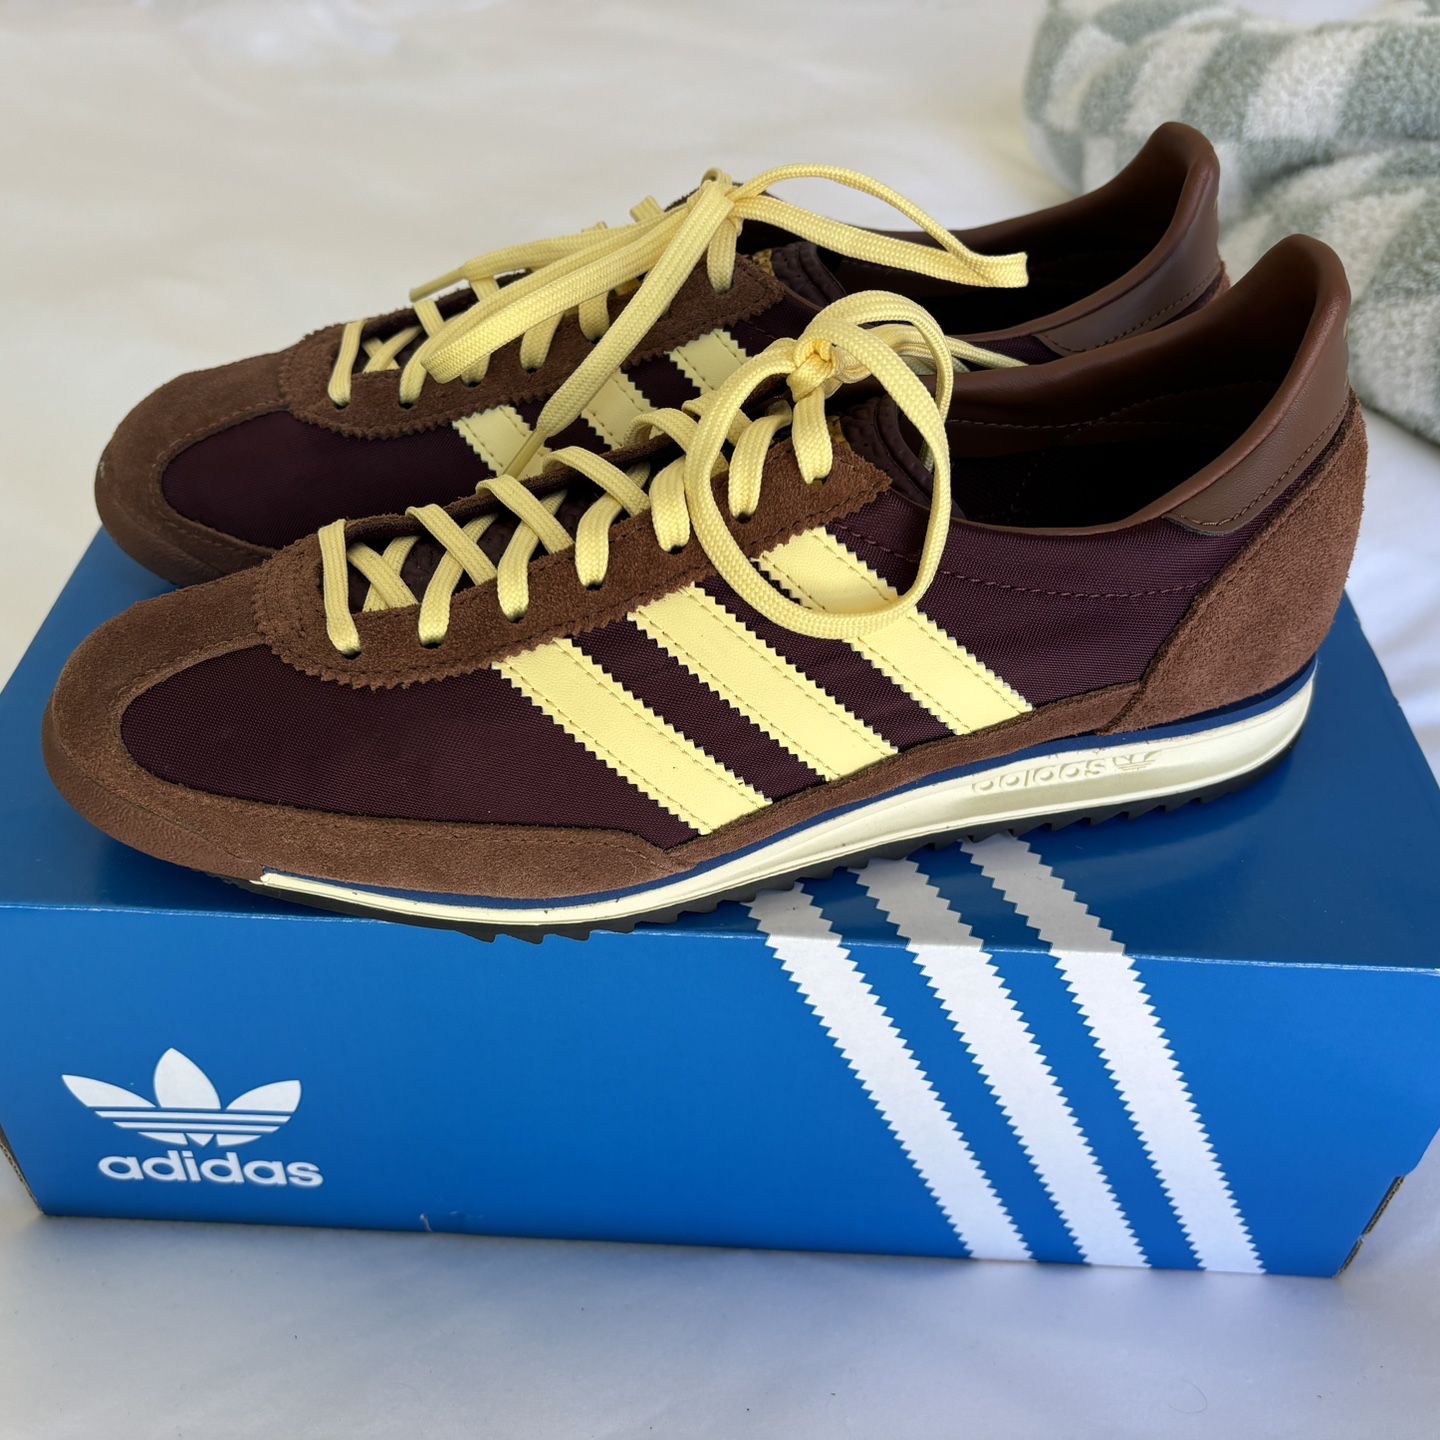 Adidas SL72 OG - Preloved Brown/Almost Yellow - W8/M7